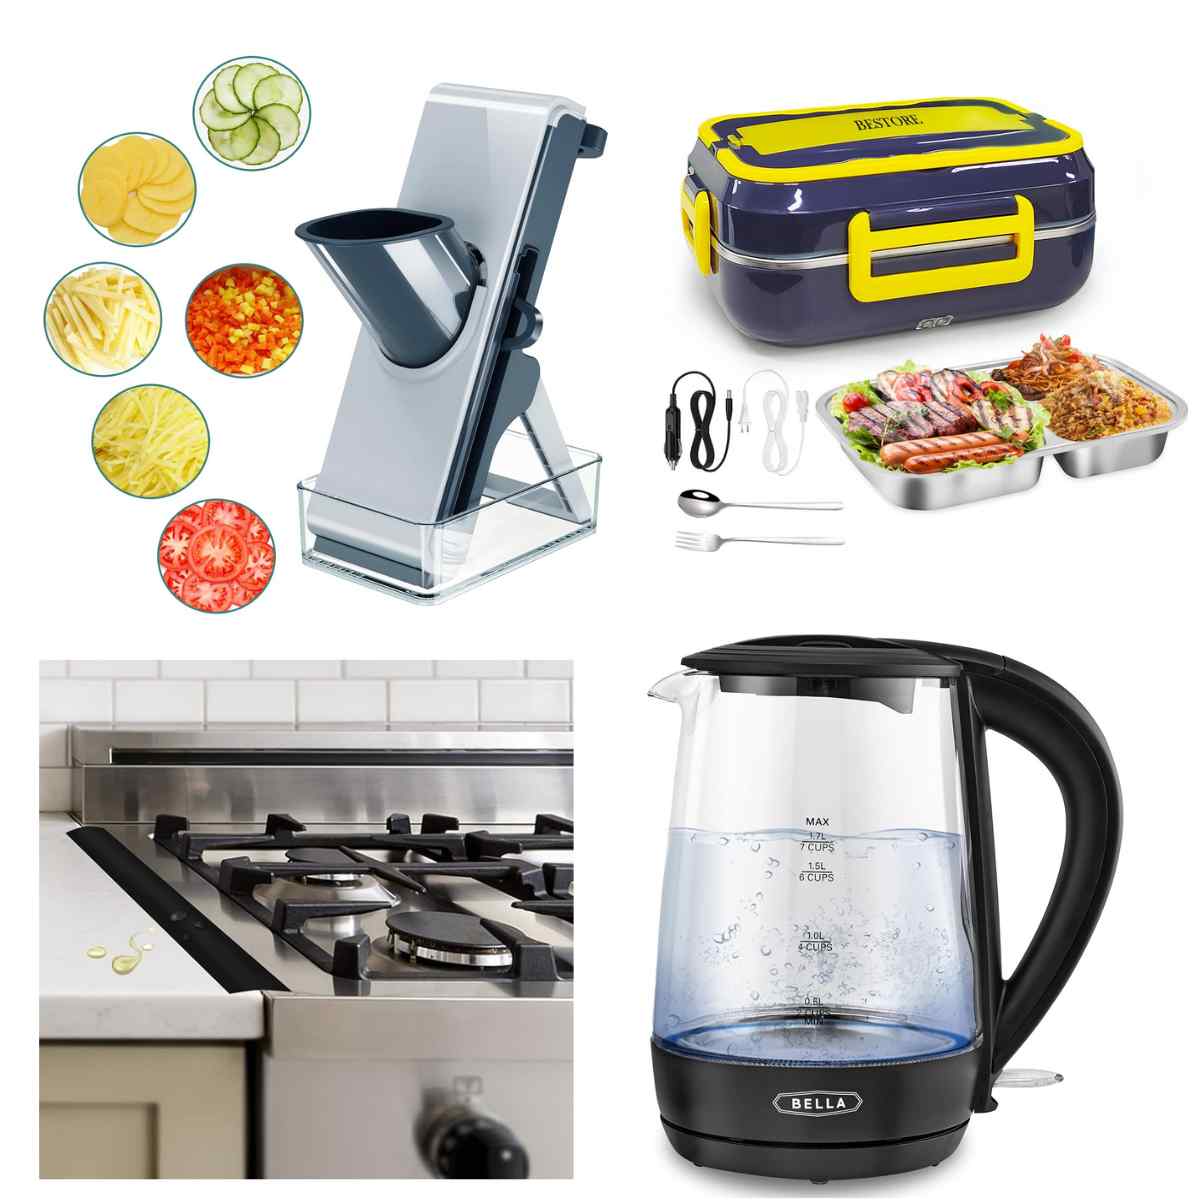 2 stove gap covers, $4+, Bella 1.7L glass electric kettle, $12+ & more